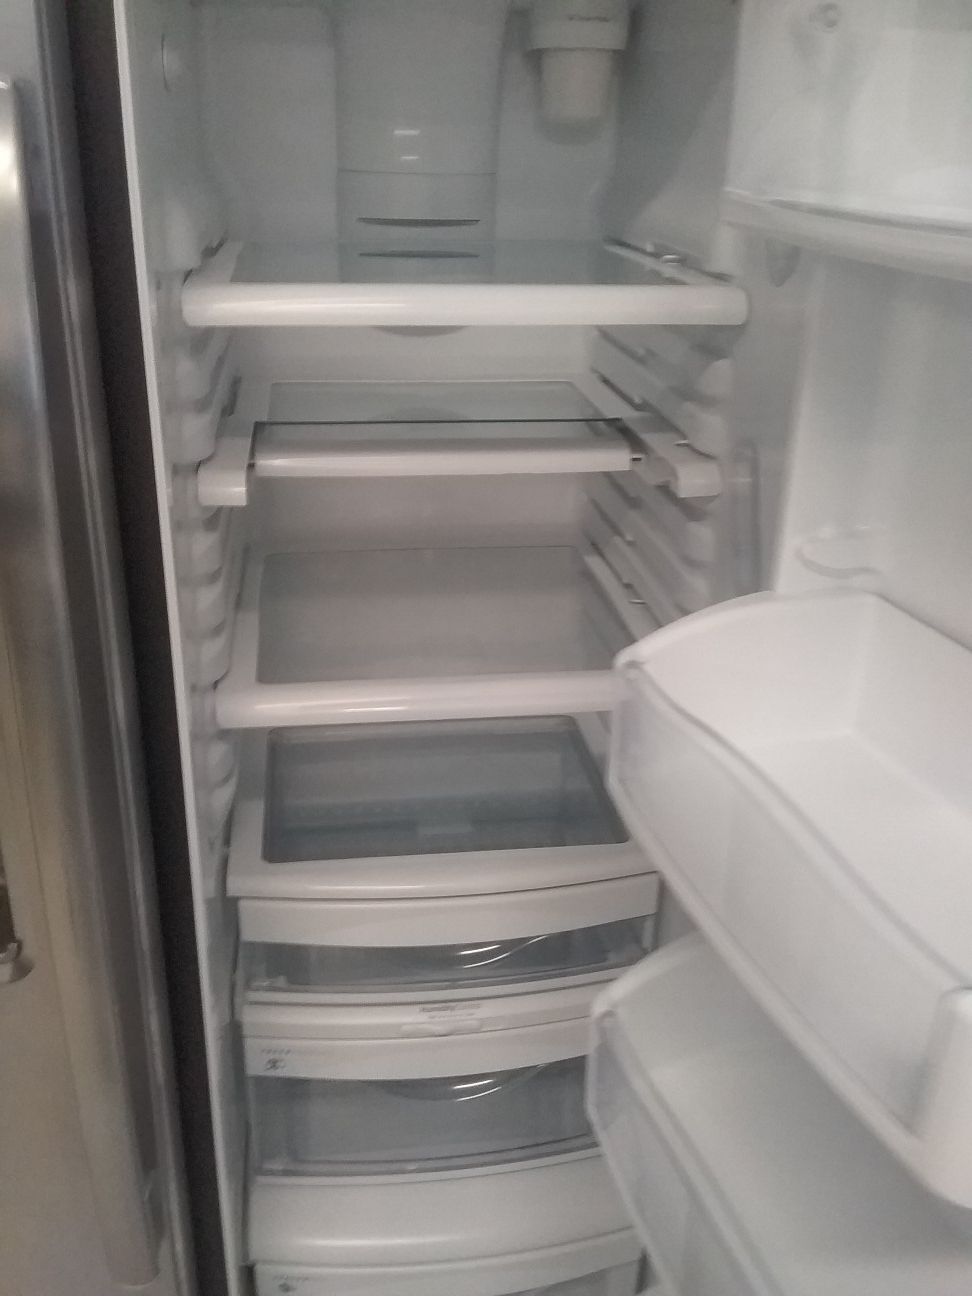 Ge side by side stainless steel refrigerator used good condition 90days warranty